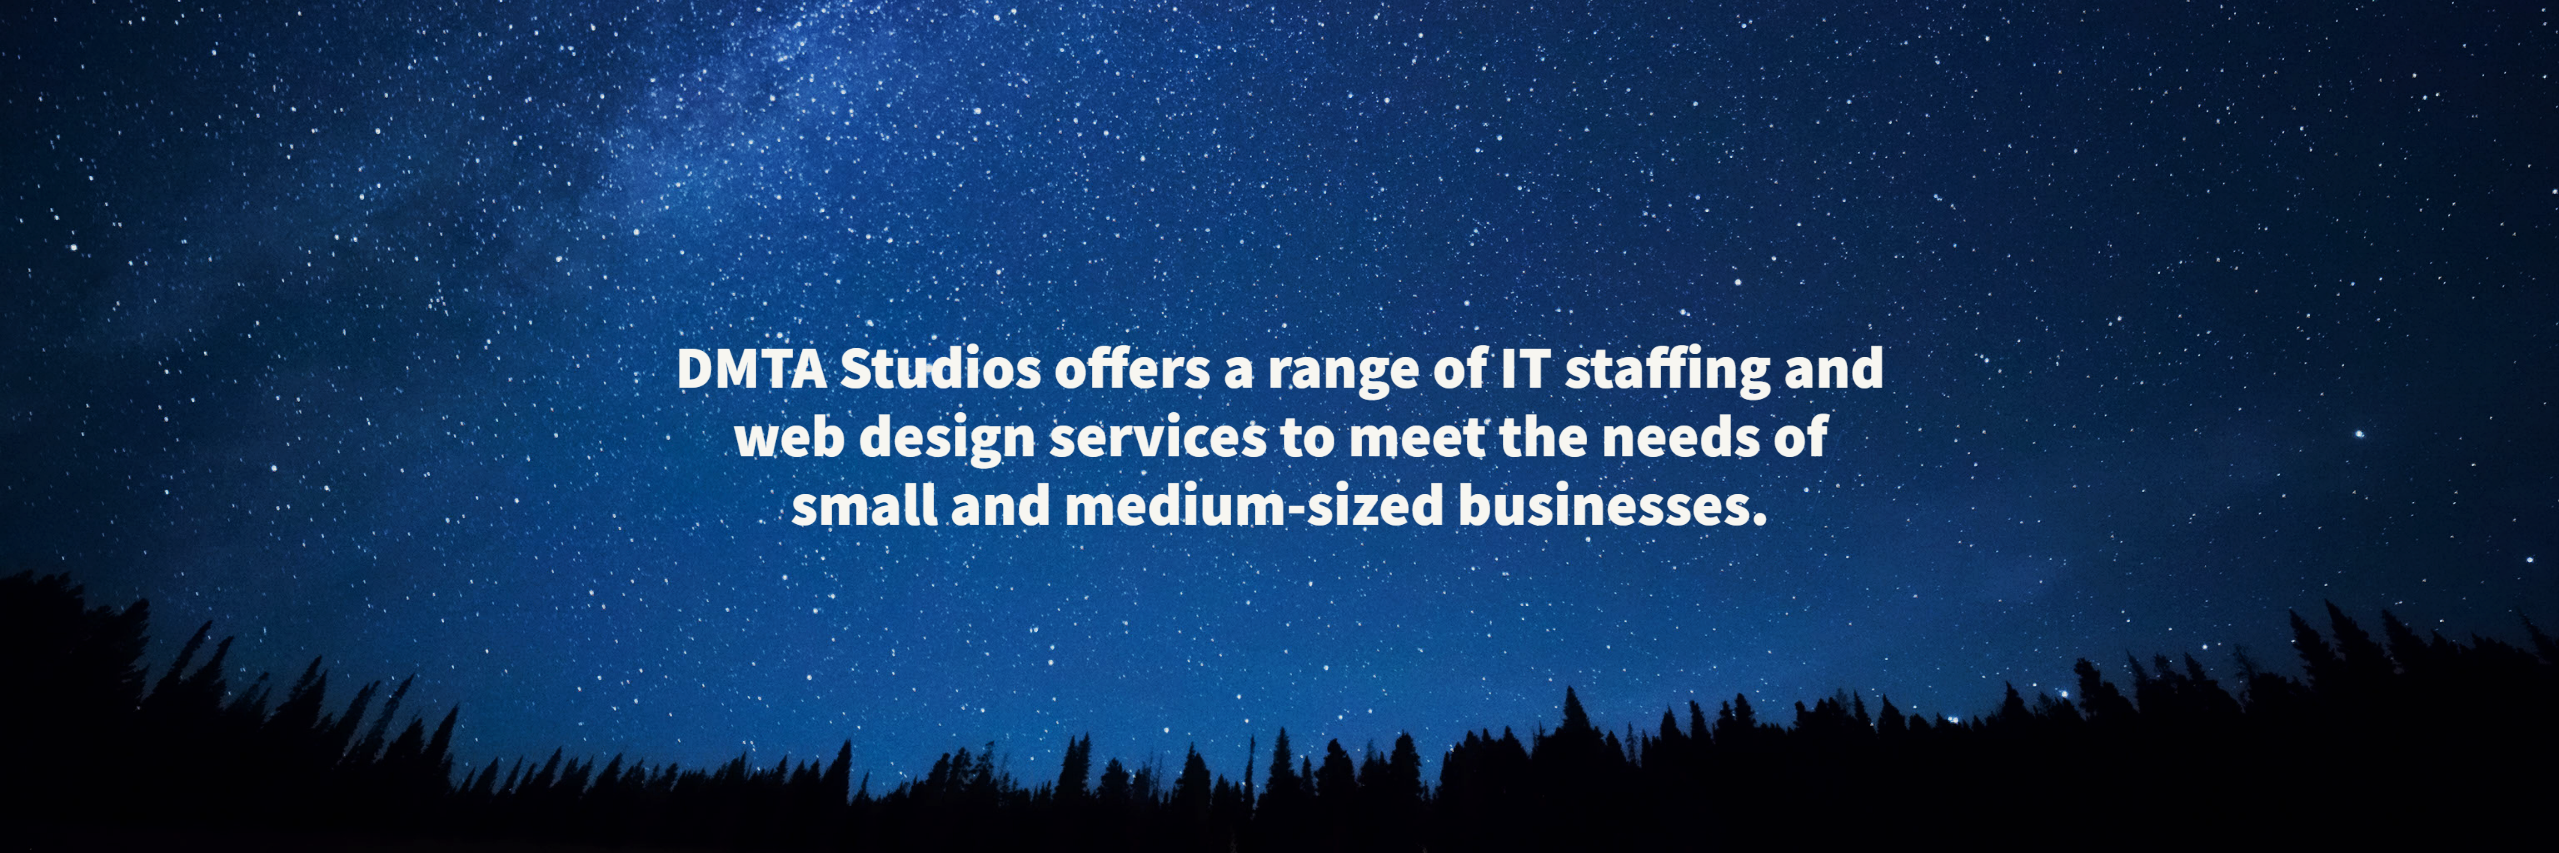 DMTA Studios offers a range of IT staffing and web design services to meet the needs of small and medium-sized businesses. 